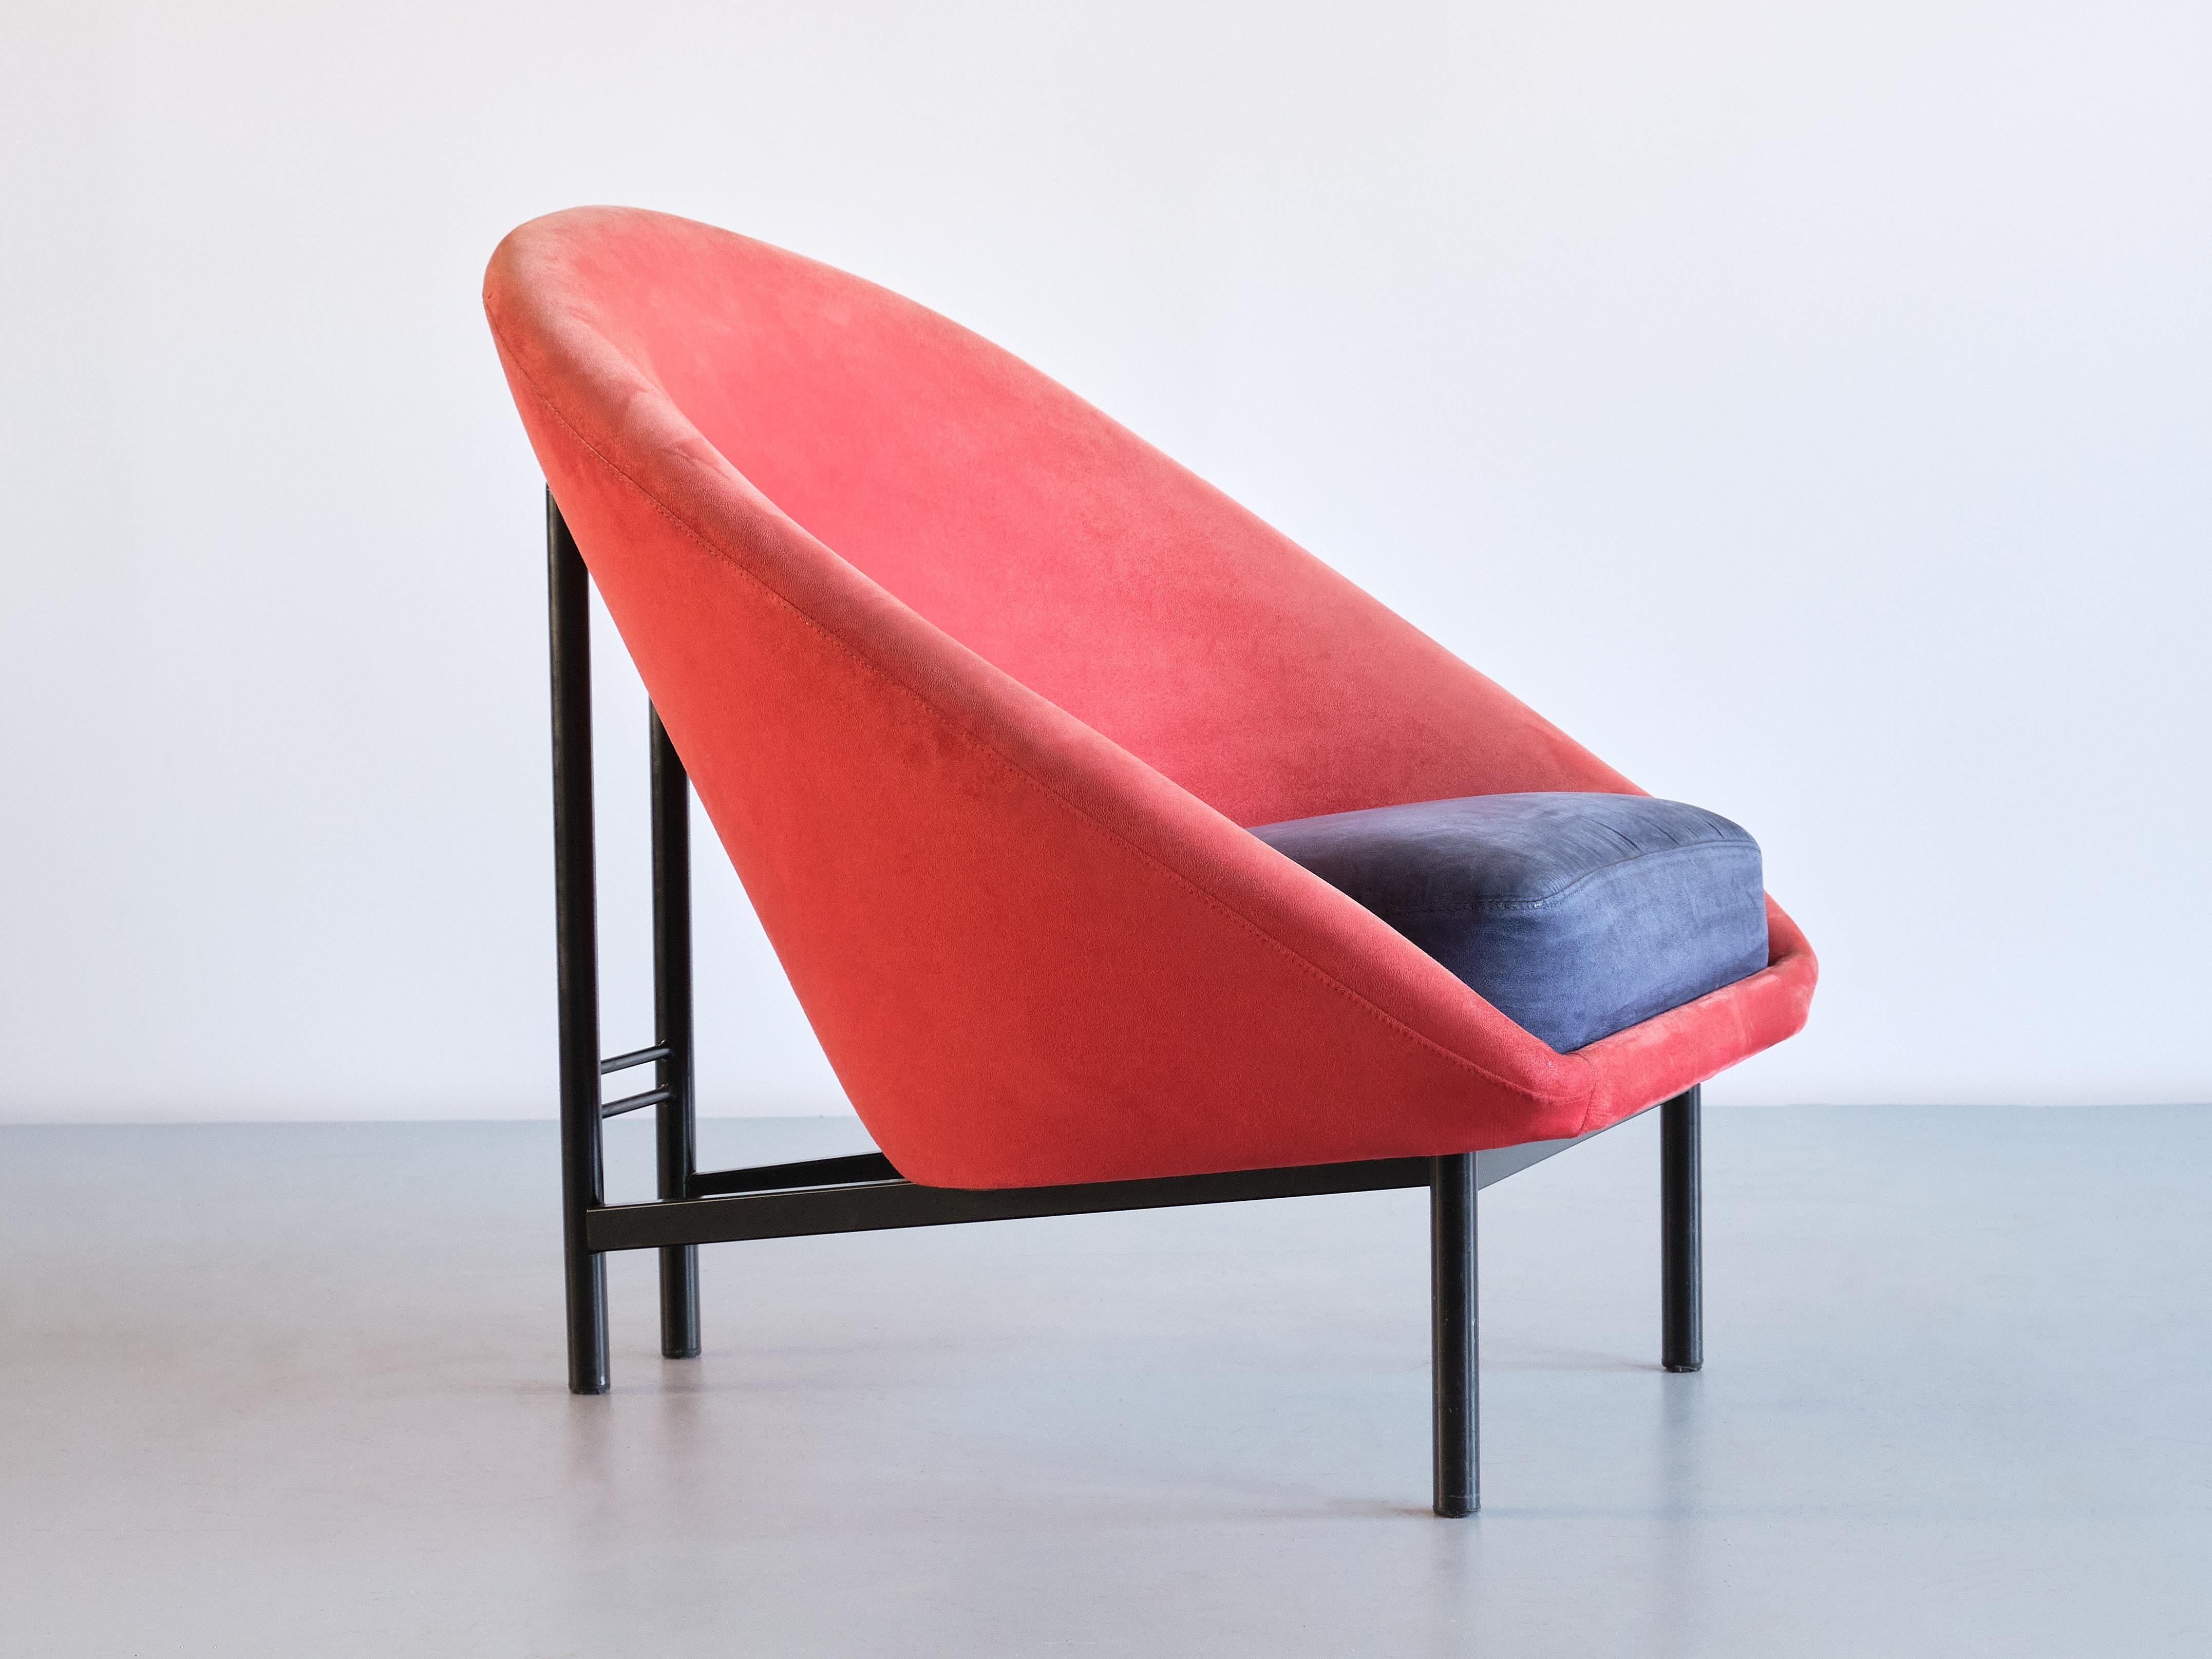 Pair of Theo Ruth 'F815' Lounge Chairs, Artifort, Netherlands, 1960s For Sale 3